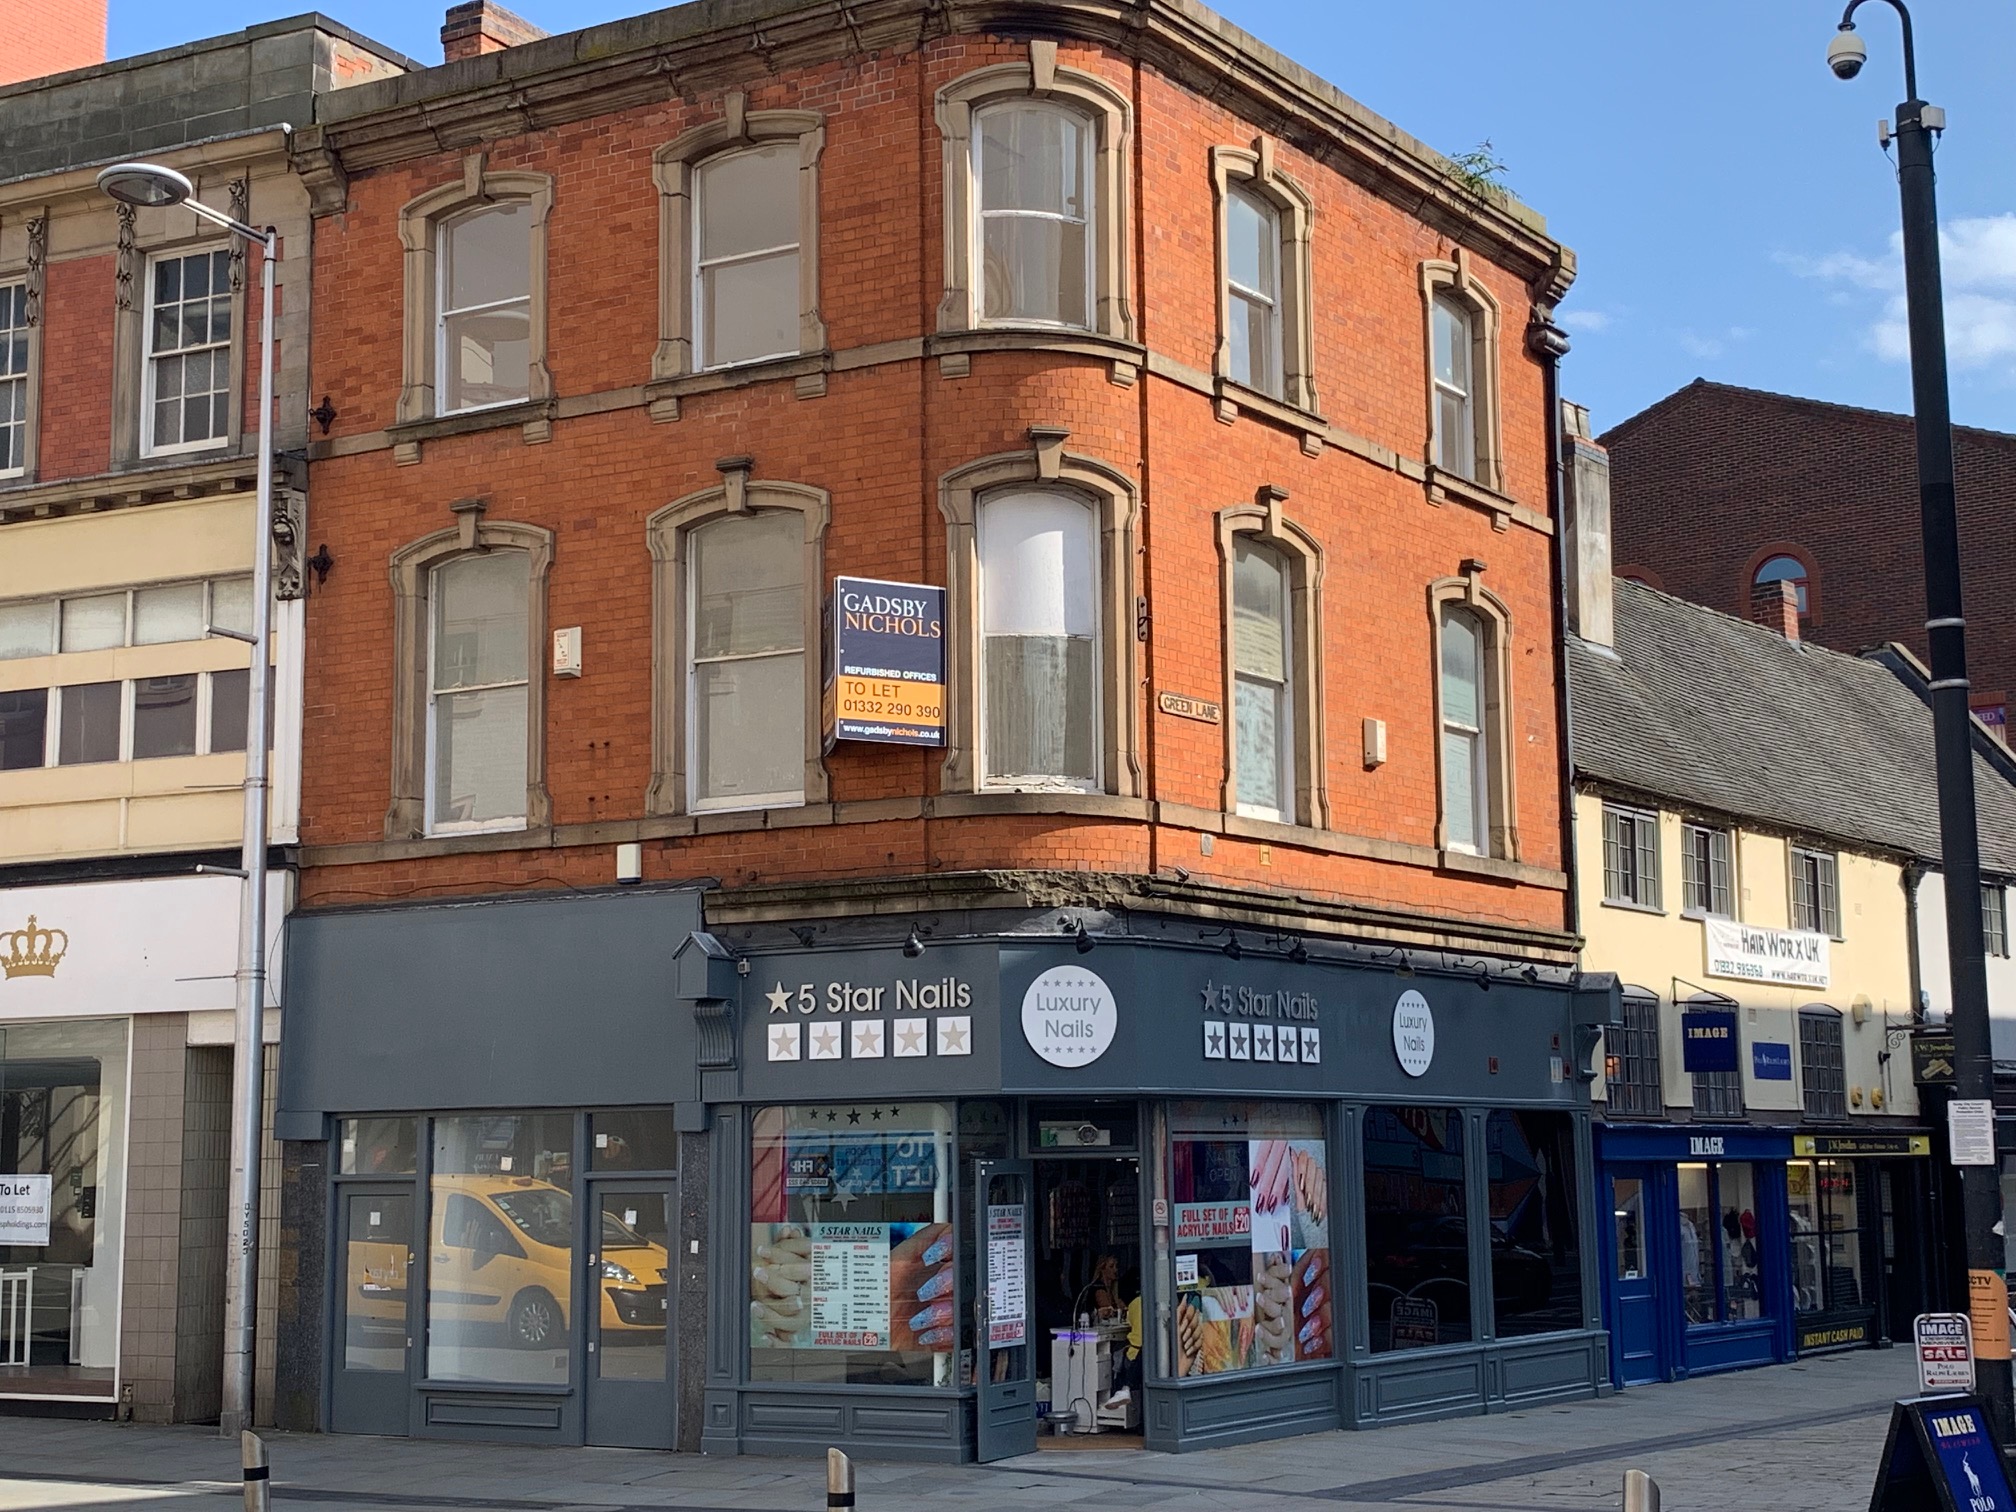 Office for rent in Derby. From Gadsby Nichols - Derby